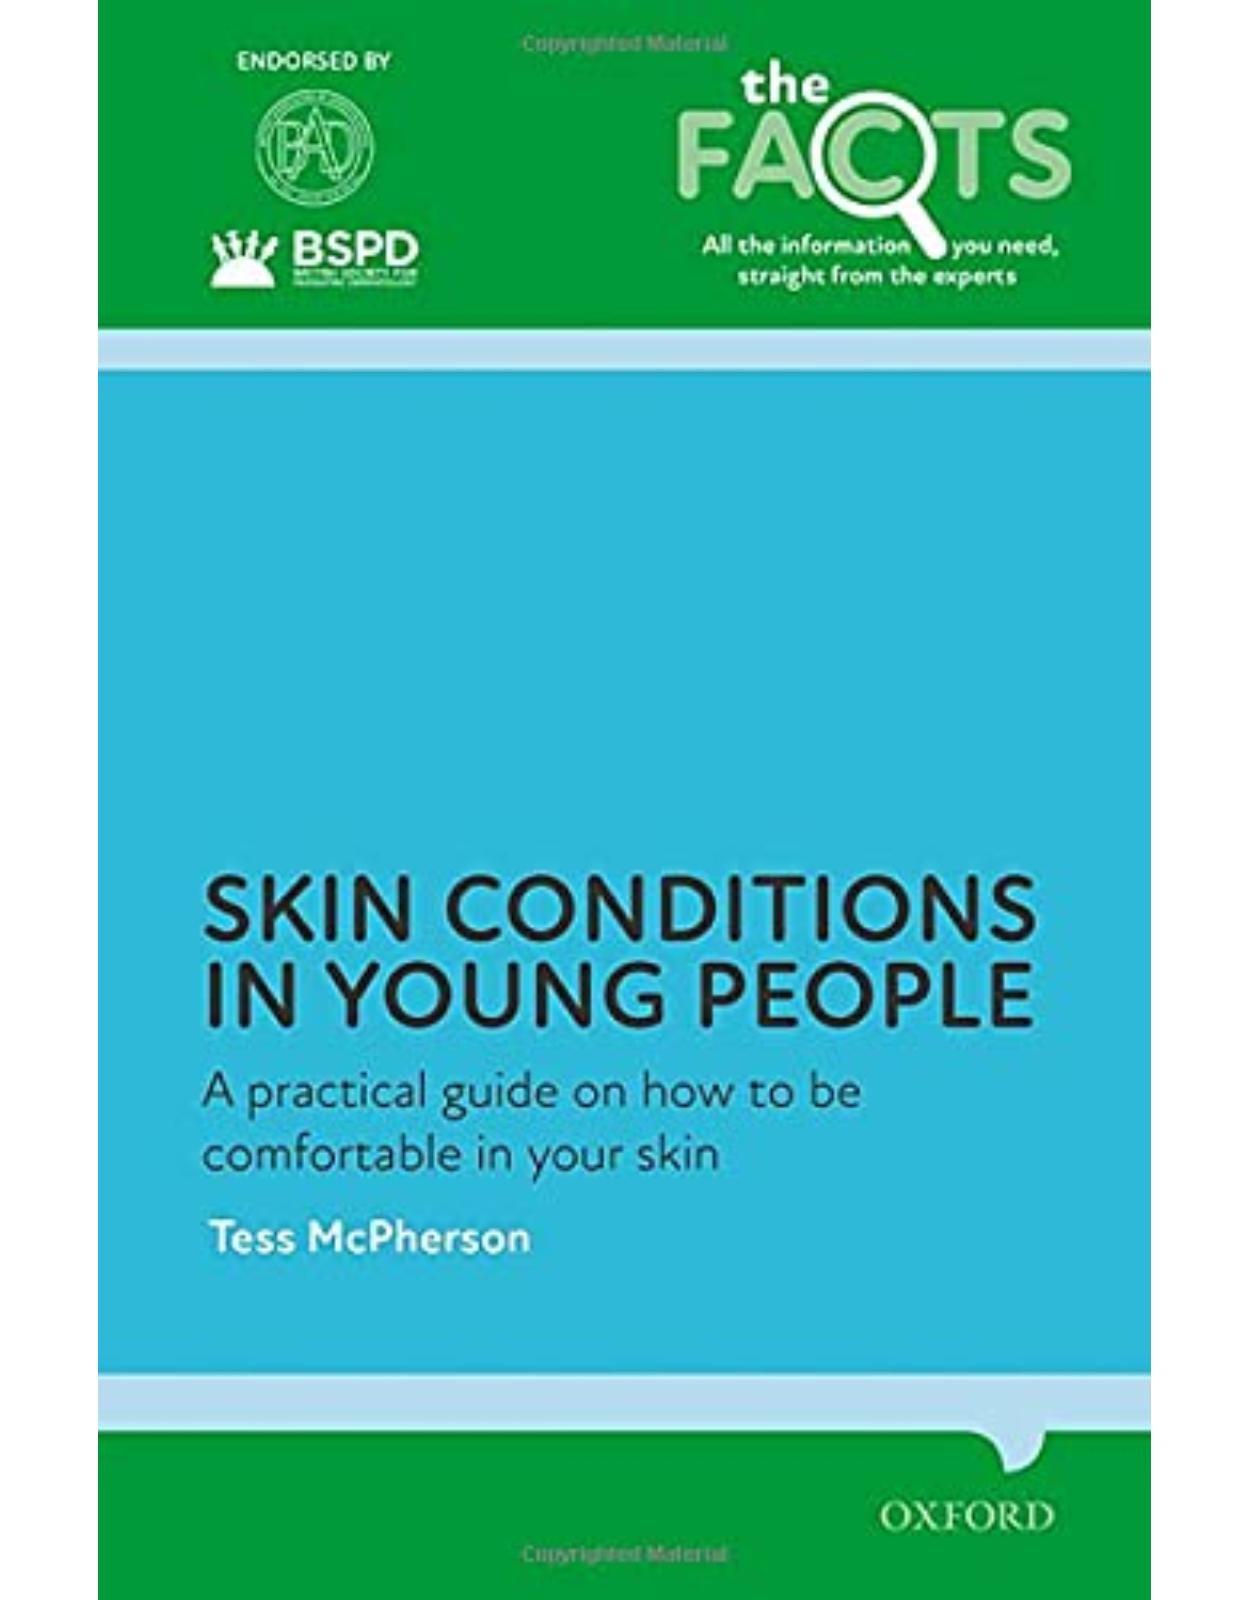 Skin conditions in young people: A practical guide on how to be comfortable in your skin 